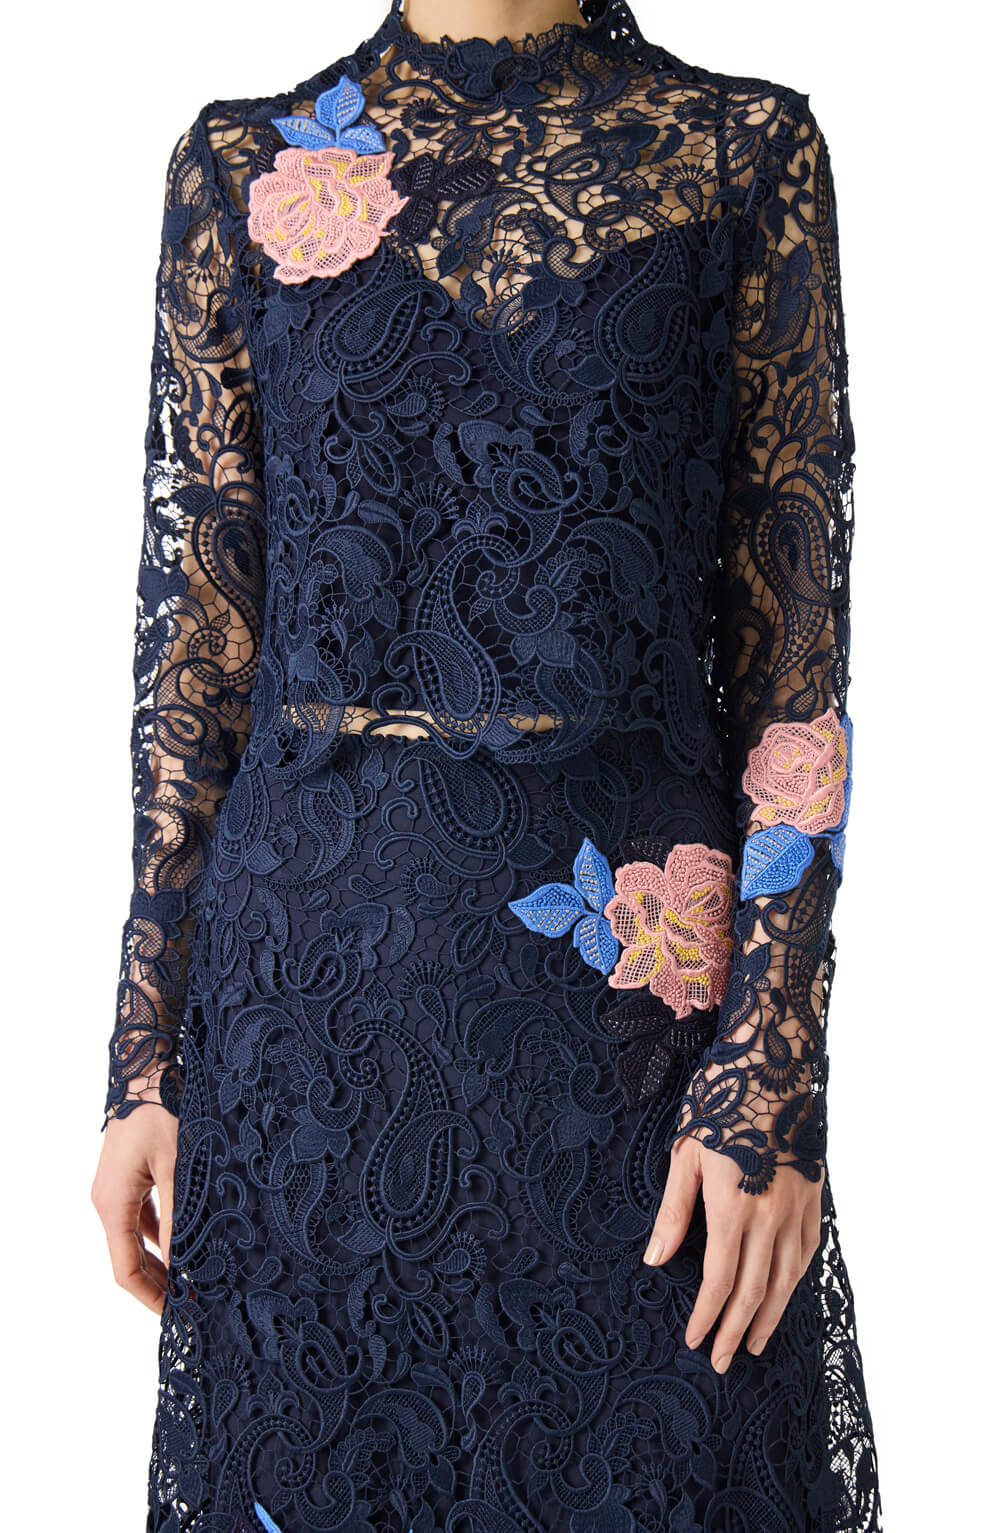 Monique Lhuillier long sleeve navy lace top with pink lace flowers.